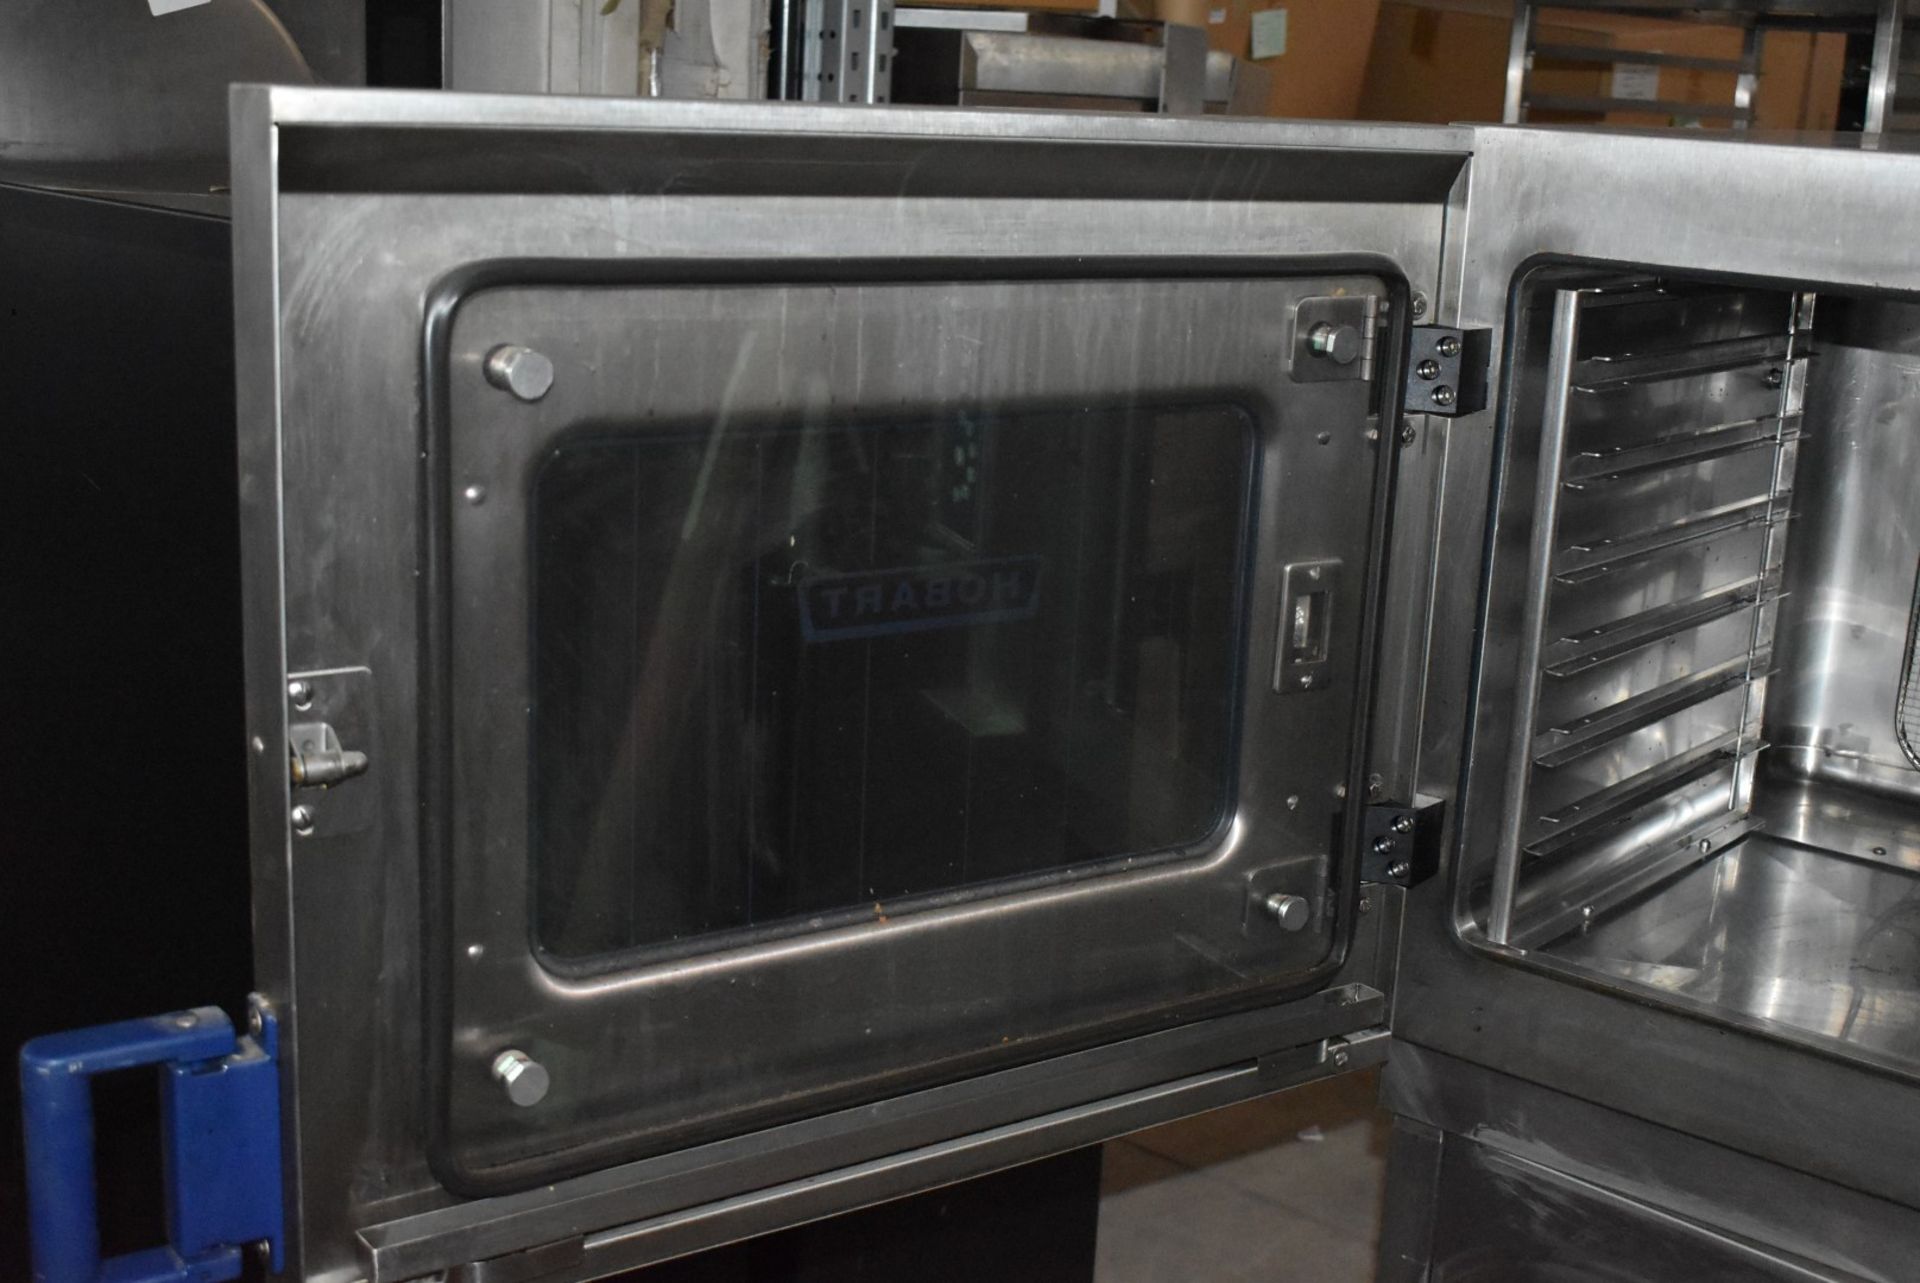 1 x Hobart 6 Grid Combi Oven With Stand - 3 Phase Power - Recently Removed From Major Supermarket - Image 8 of 10